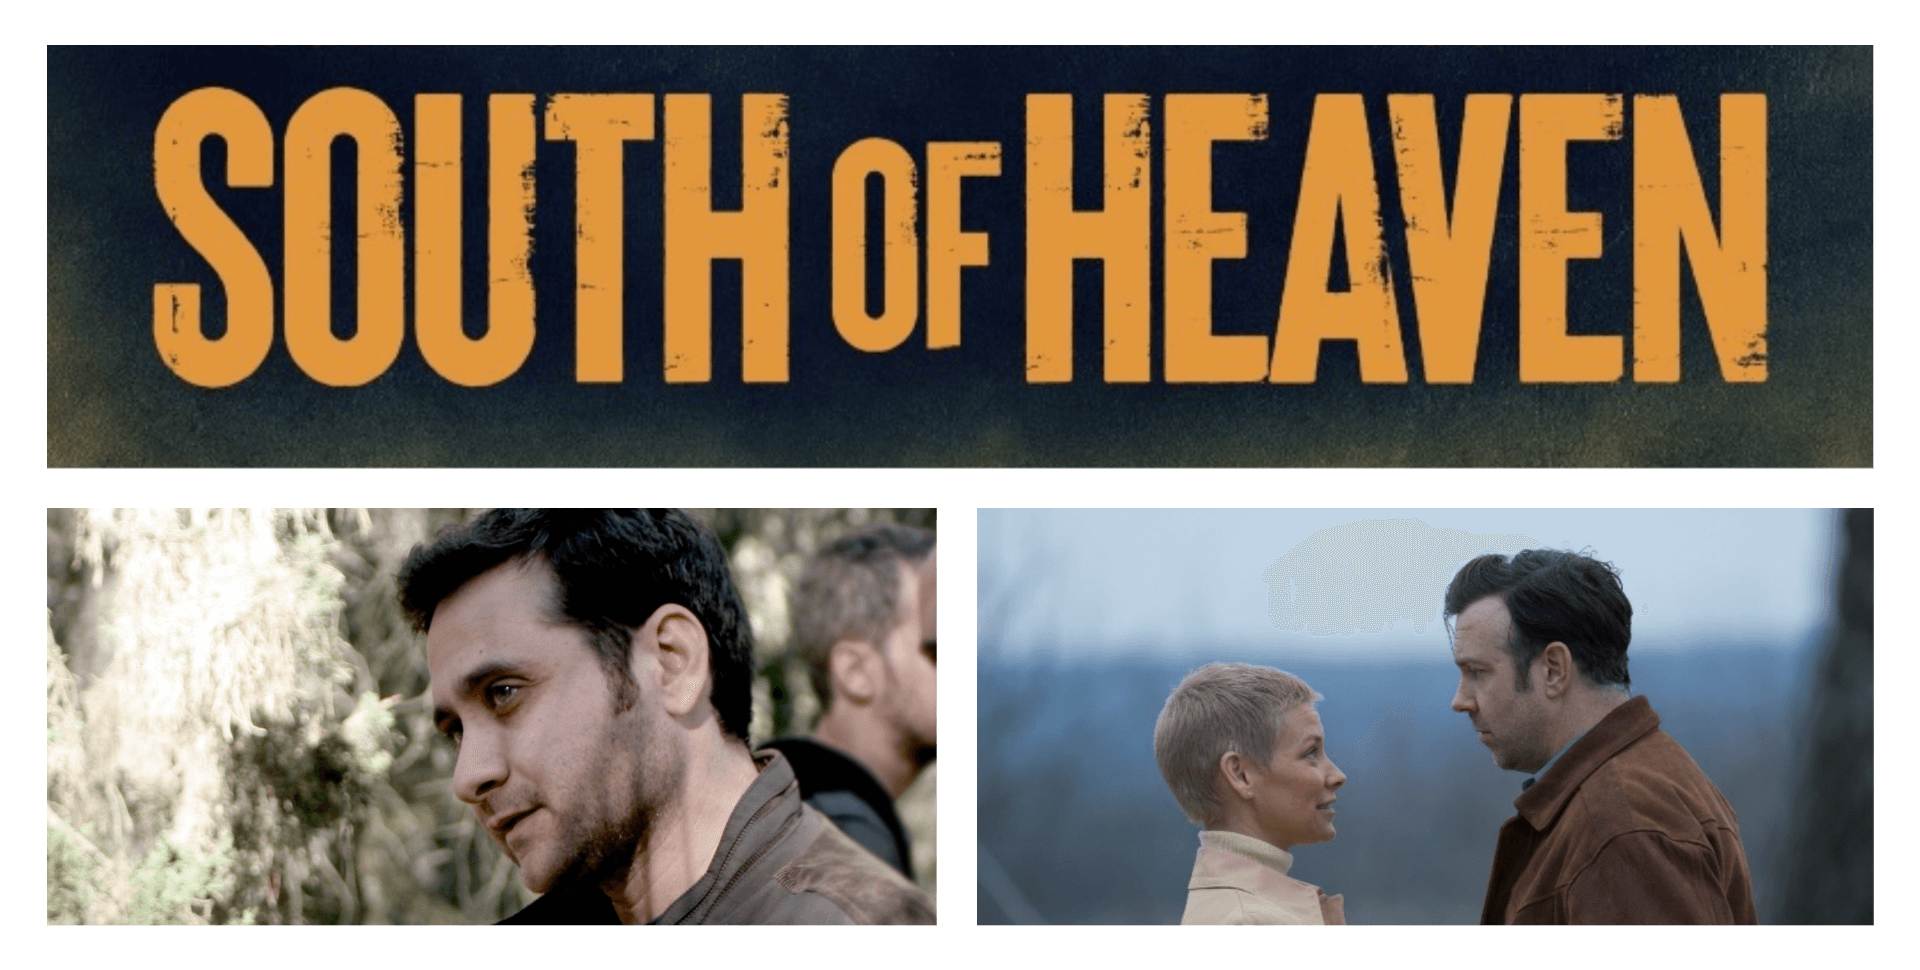 Interview with 'South of Heaven' filmmaker